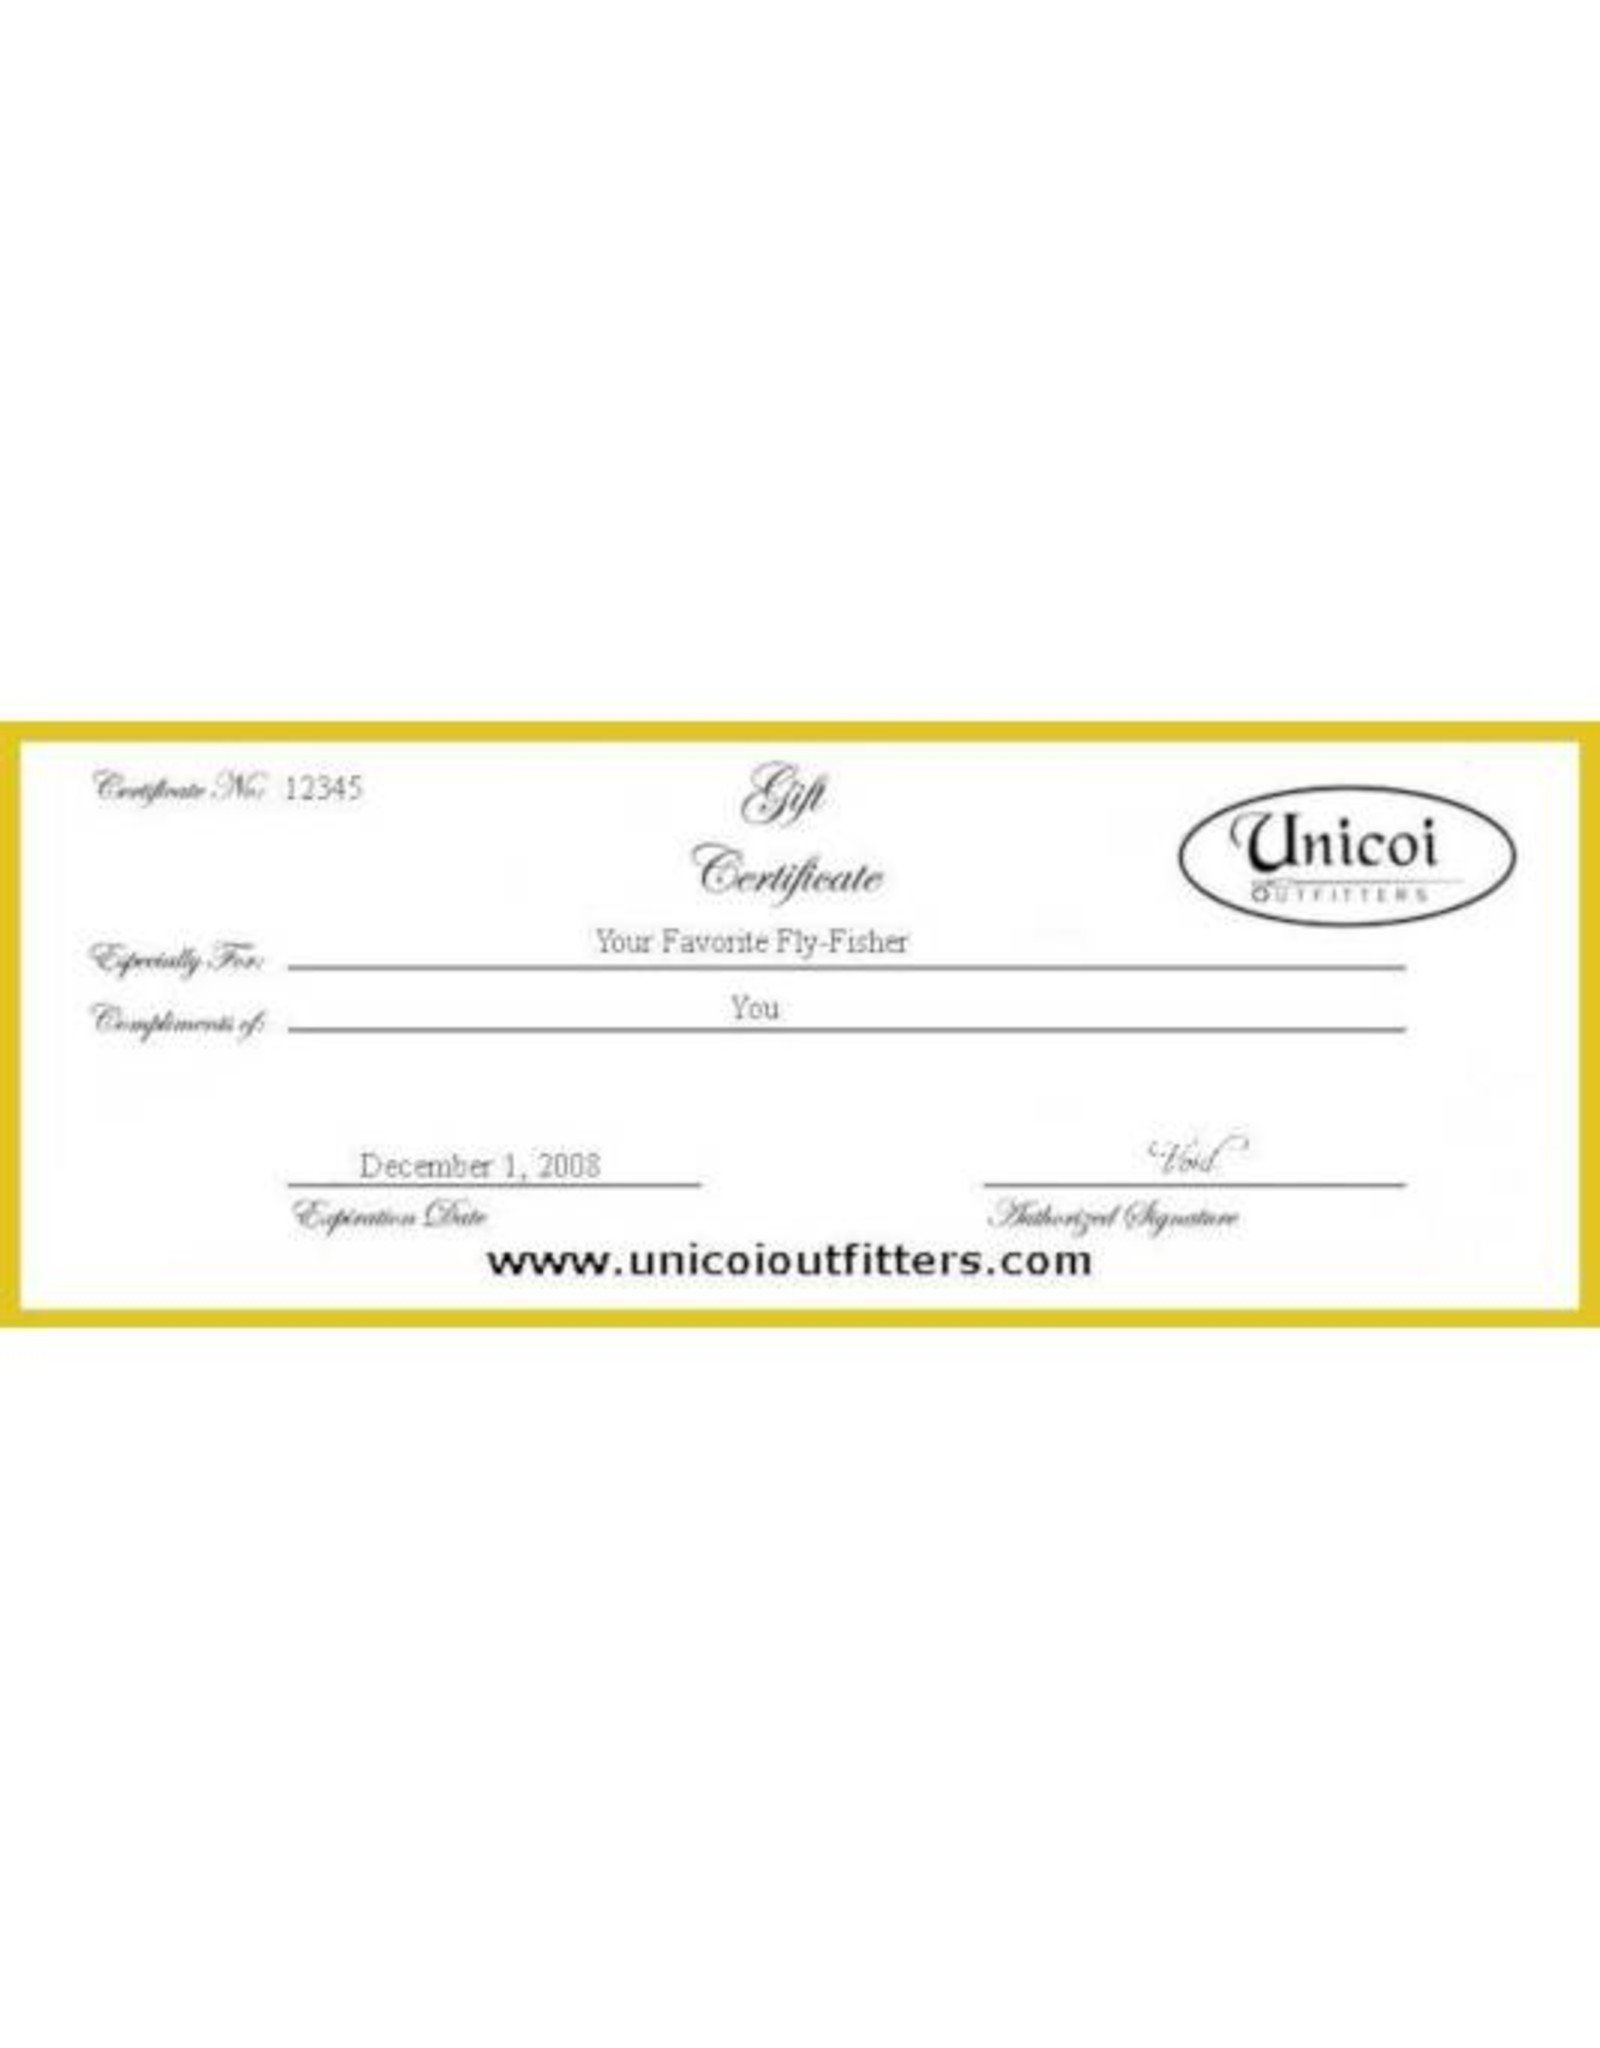 Unicoi Outfitters Gift Certificate - Guided Trophy Trout Fishing at Nacoochee Bend